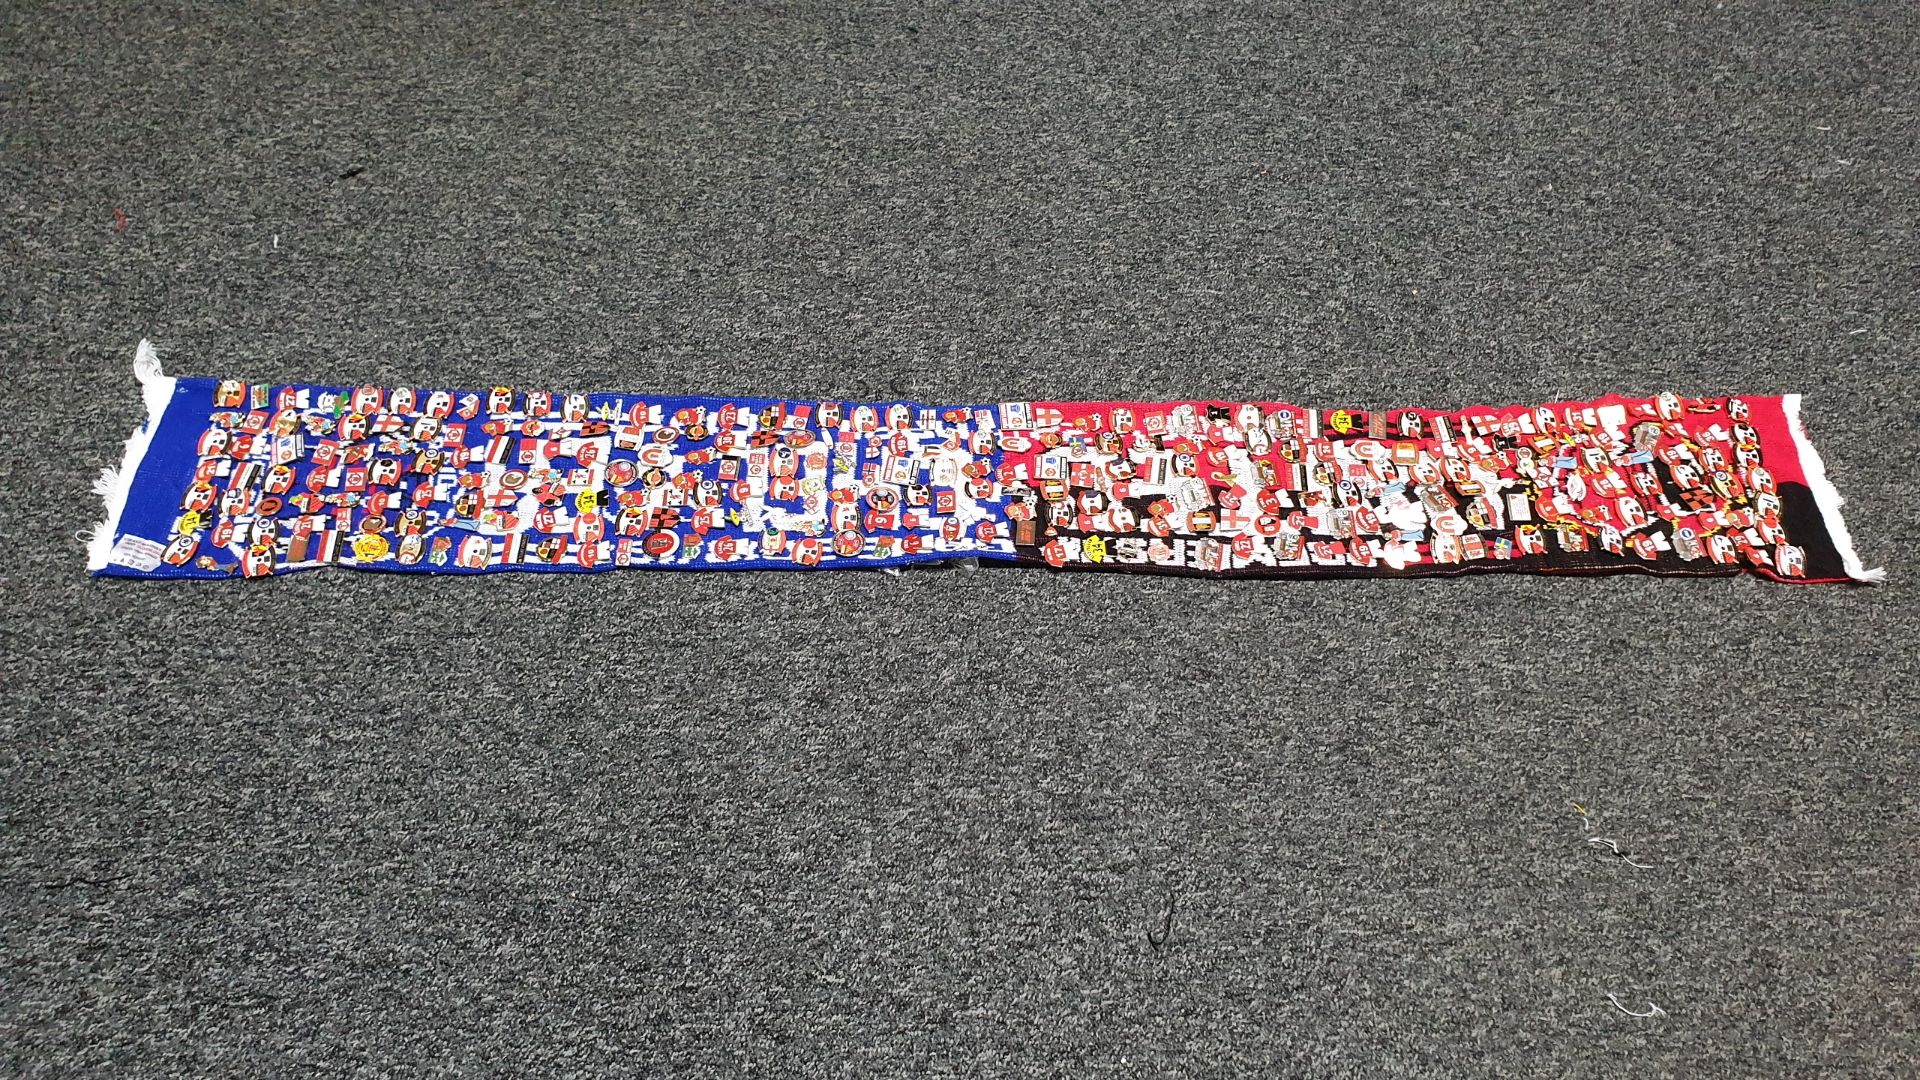 MANCHESTER UNITED SCARF CONTAINING APPROX 270 X PIN BADGES IE MUFC, UNITED KING KONG, BATTLE FOR